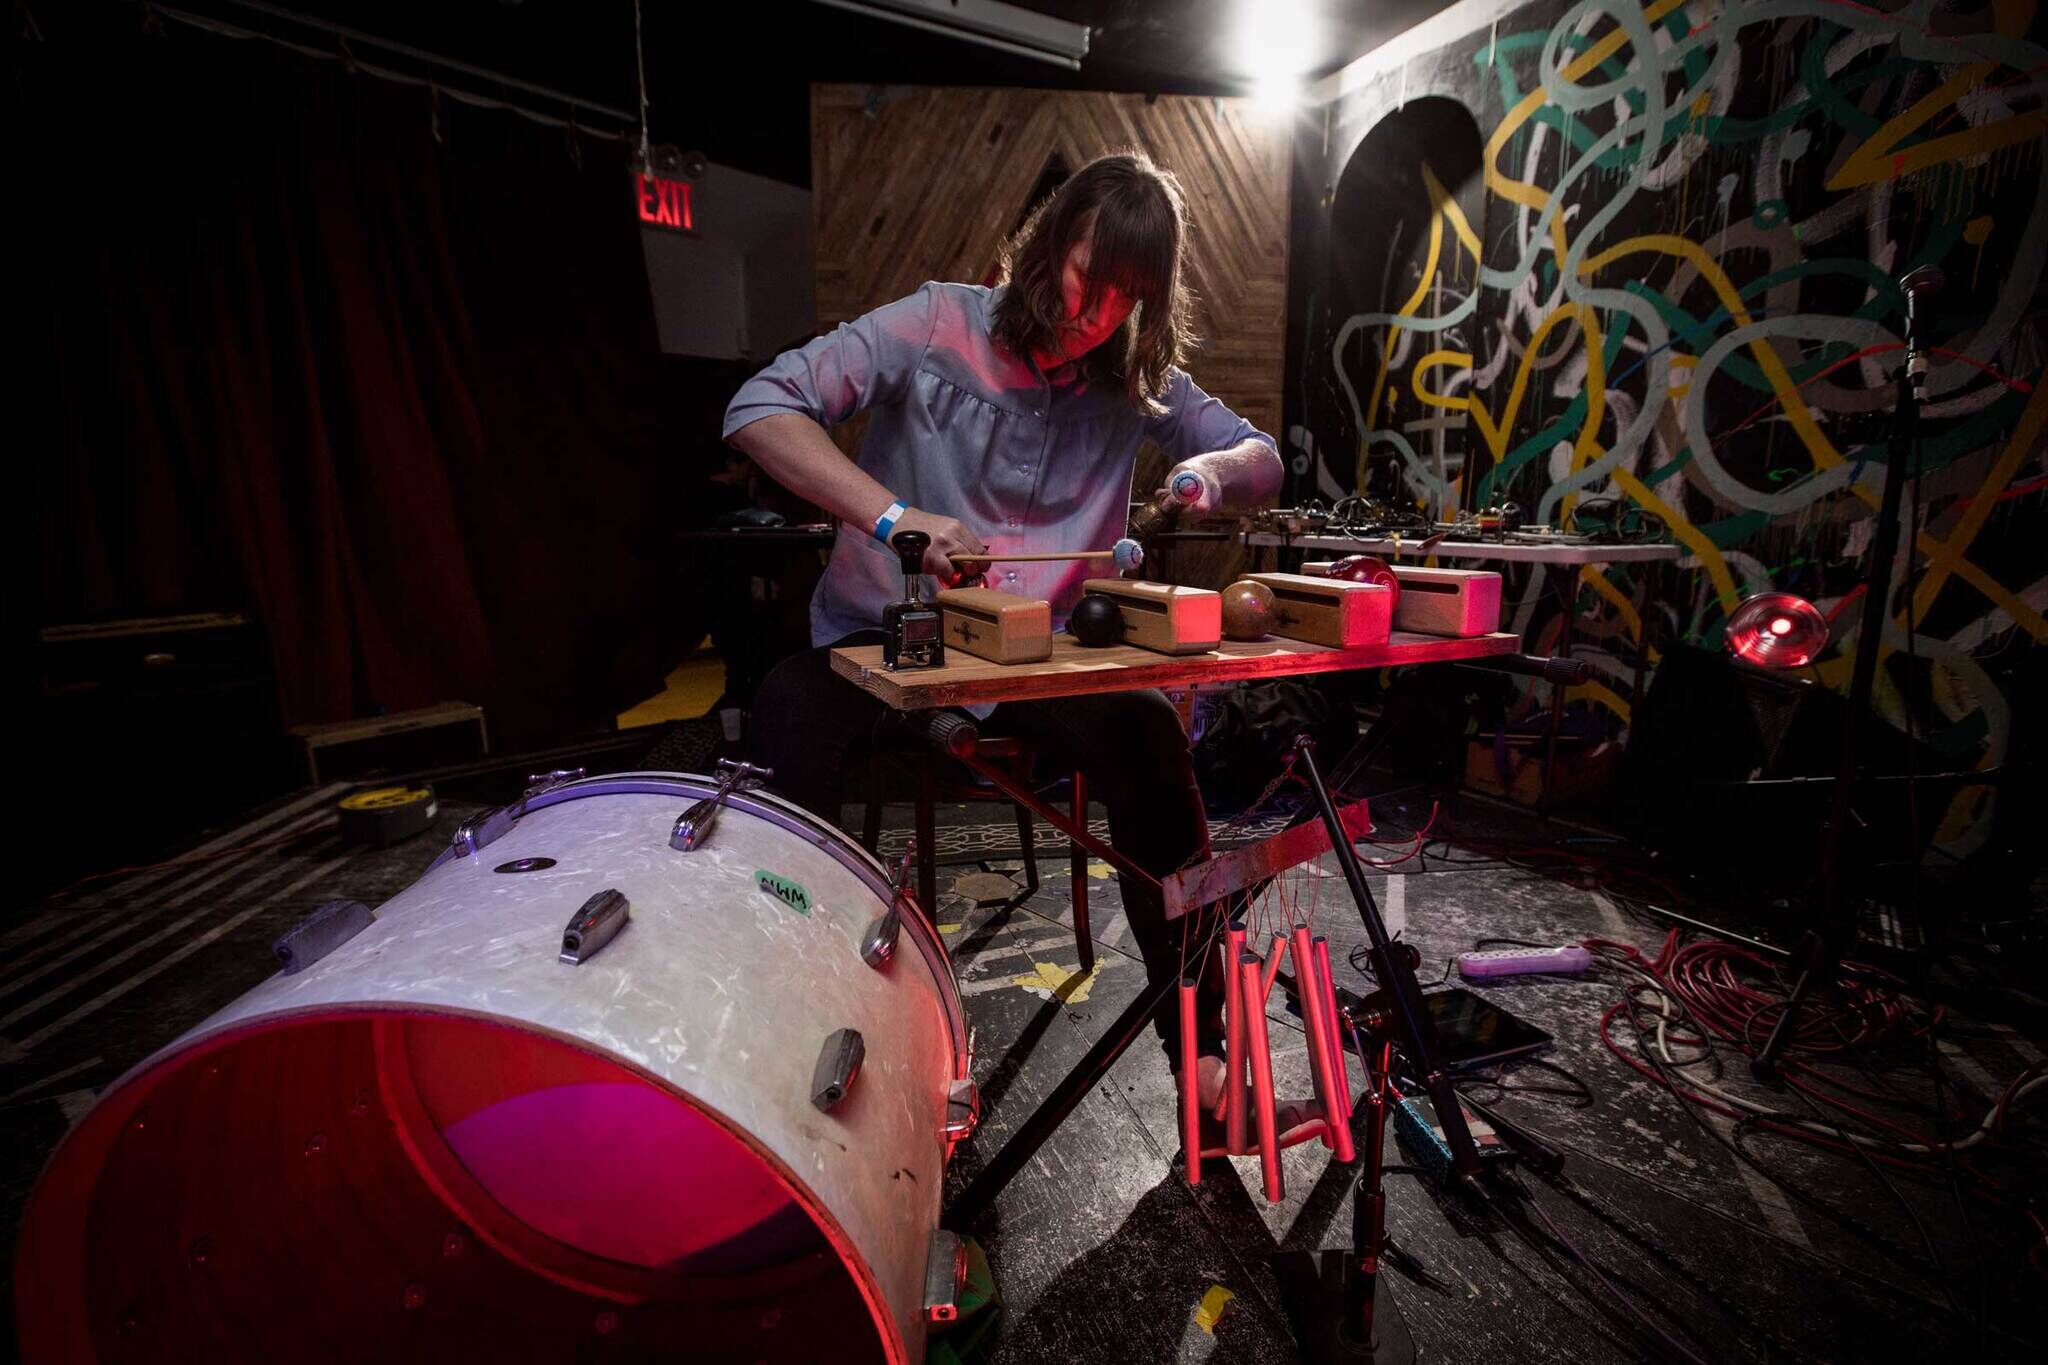 A person playing an experimental music setup with various objects on a table, in front of a colorful graffiti backdrop.